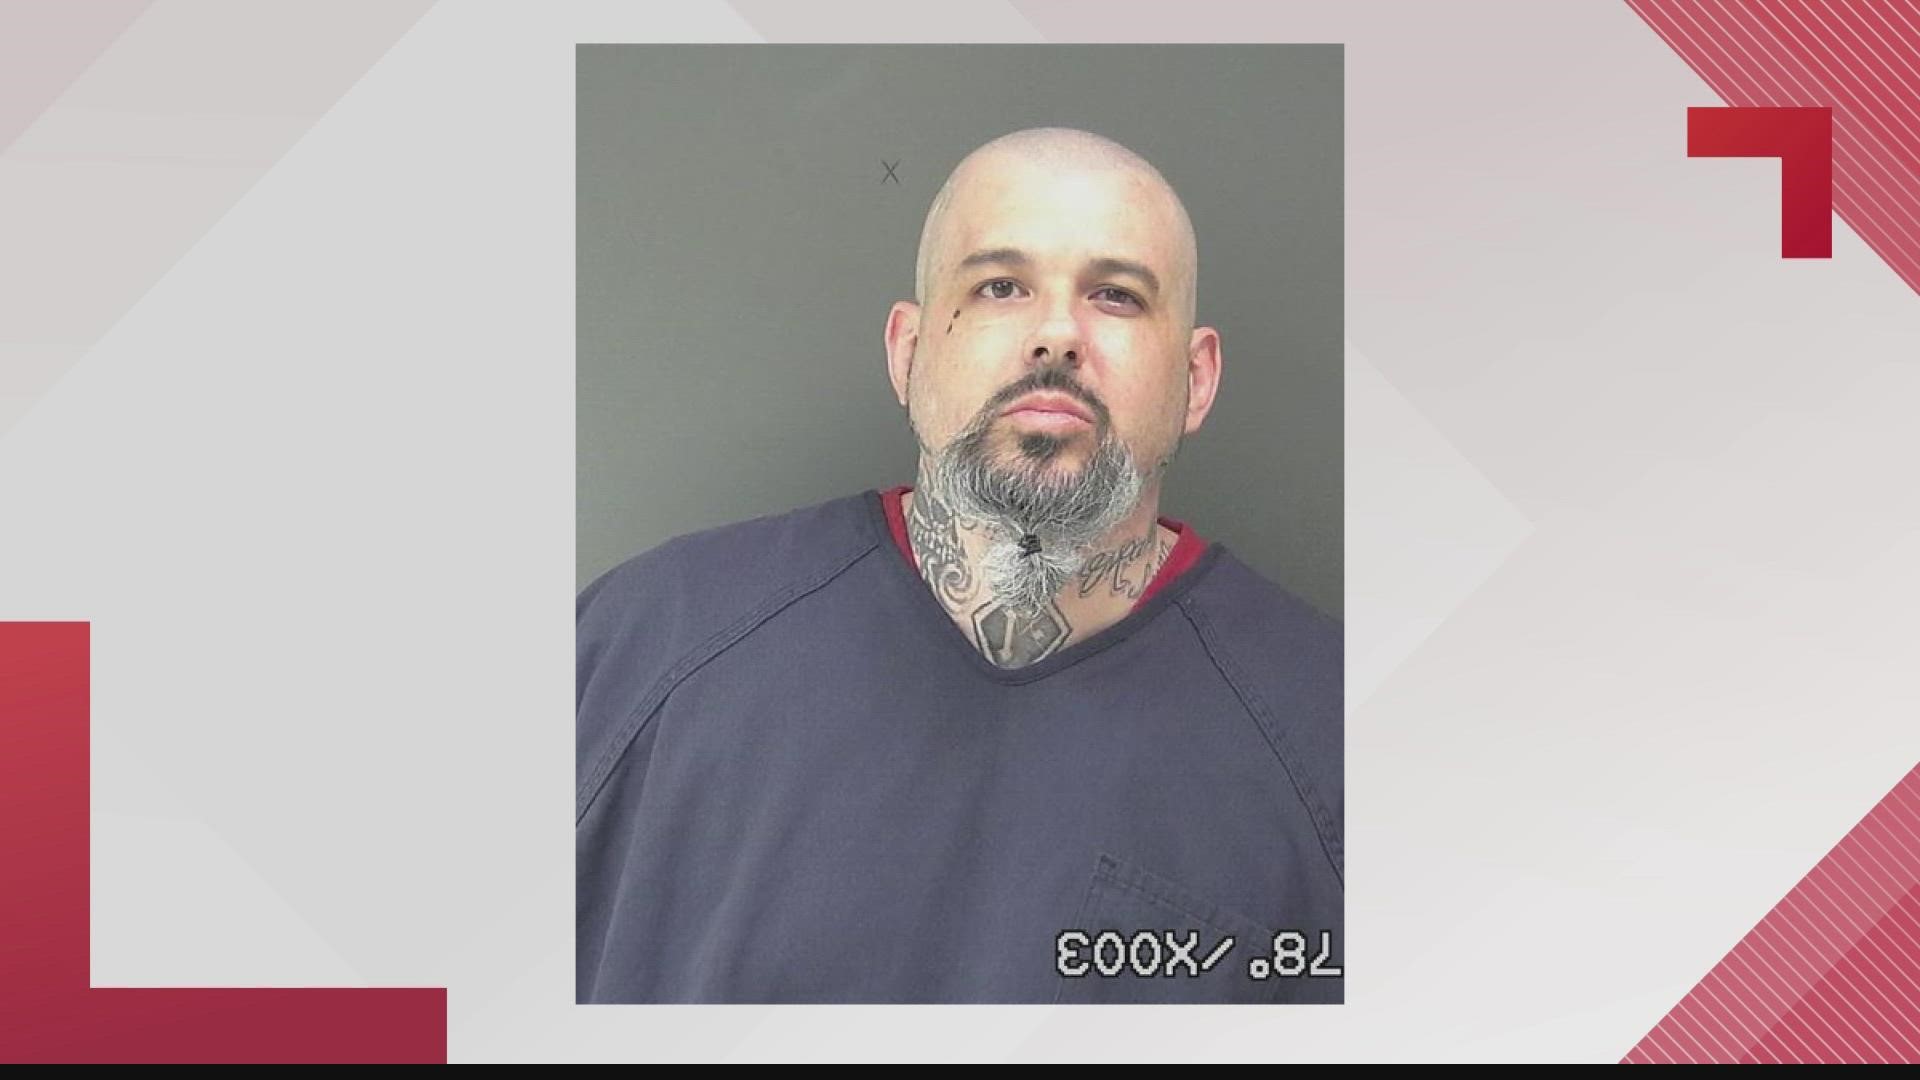 Police in Clinton County are looking for this man - 41-year-old Matthew Gilbert.